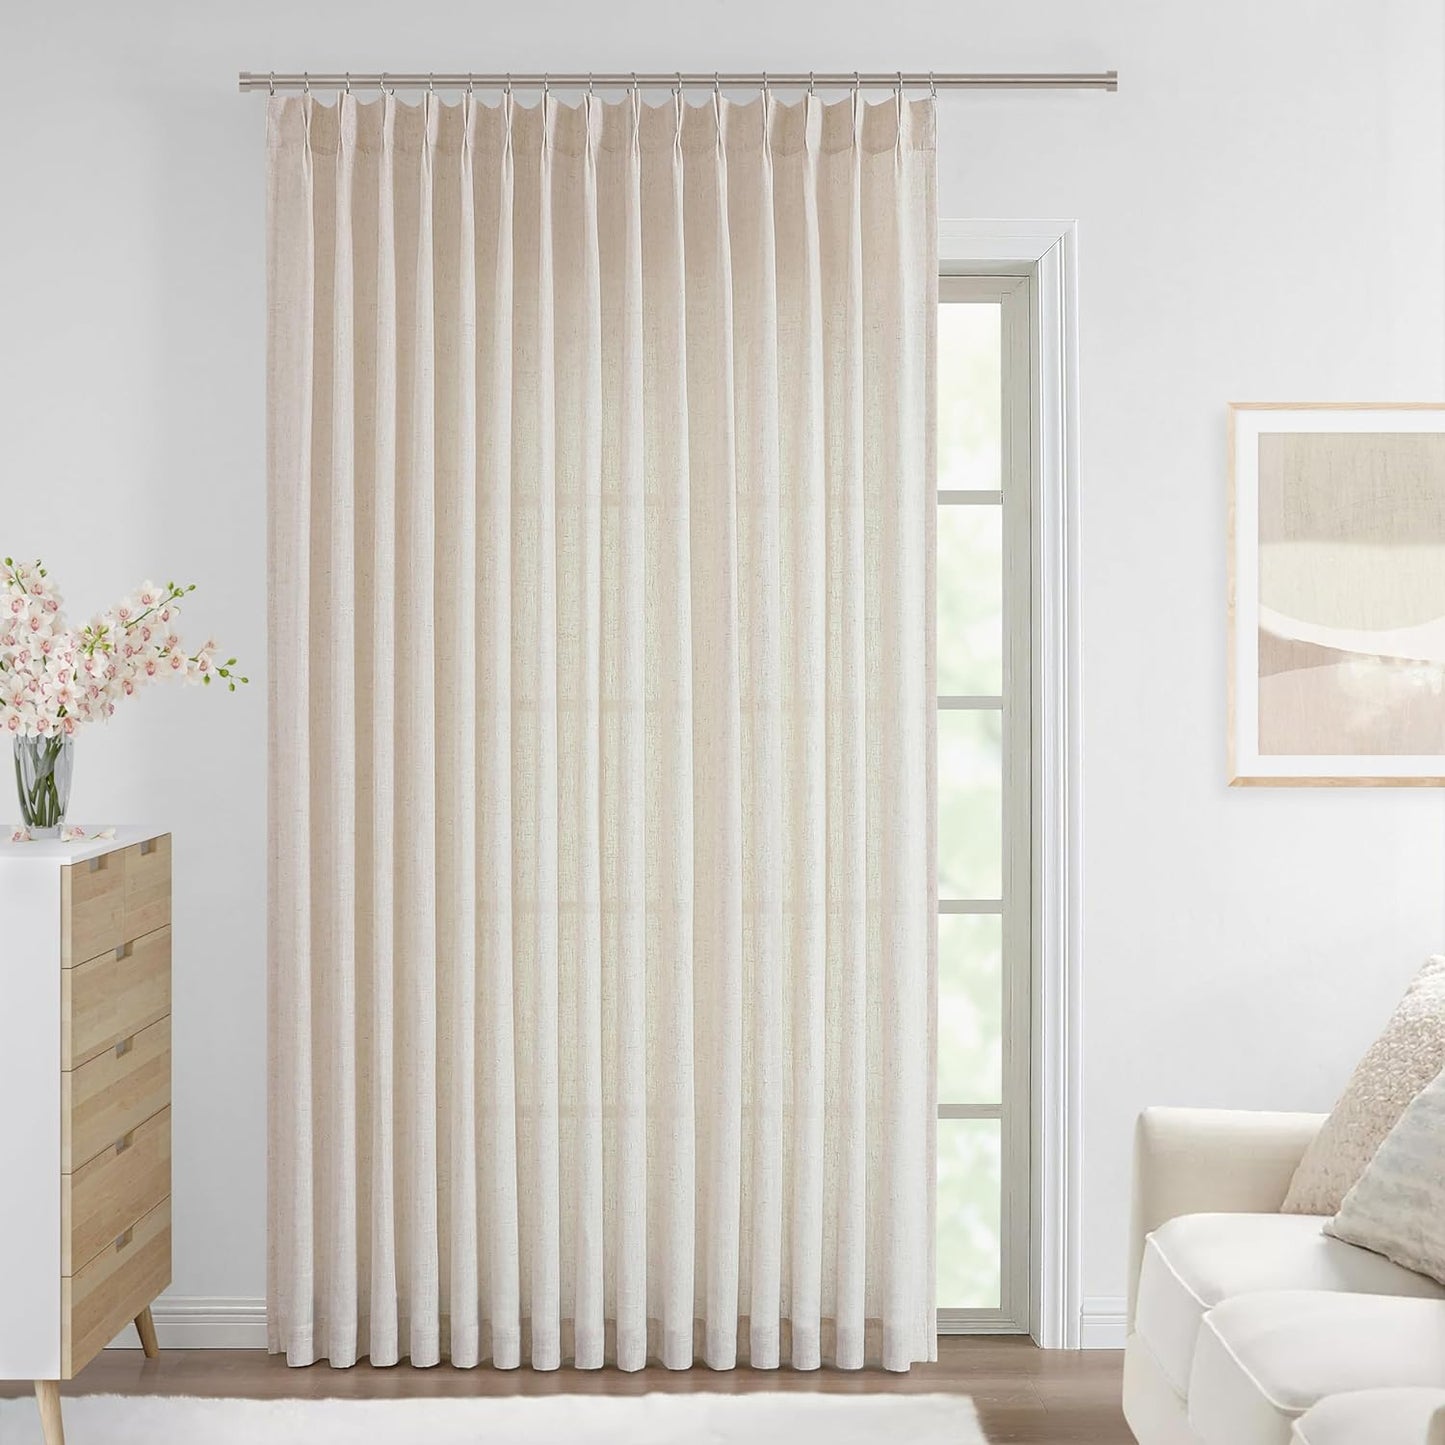 Vision Home Natural Pinch Pleated Semi Sheer Curtains Textured Linen Blended Light Filtering Window Curtains 84 Inch for Living Room Bedroom Pinch Pleat Drapes with Hooks 2 Panels 42" Wx84 L  Vision Home Natural/Pinch 84"X102"X1 